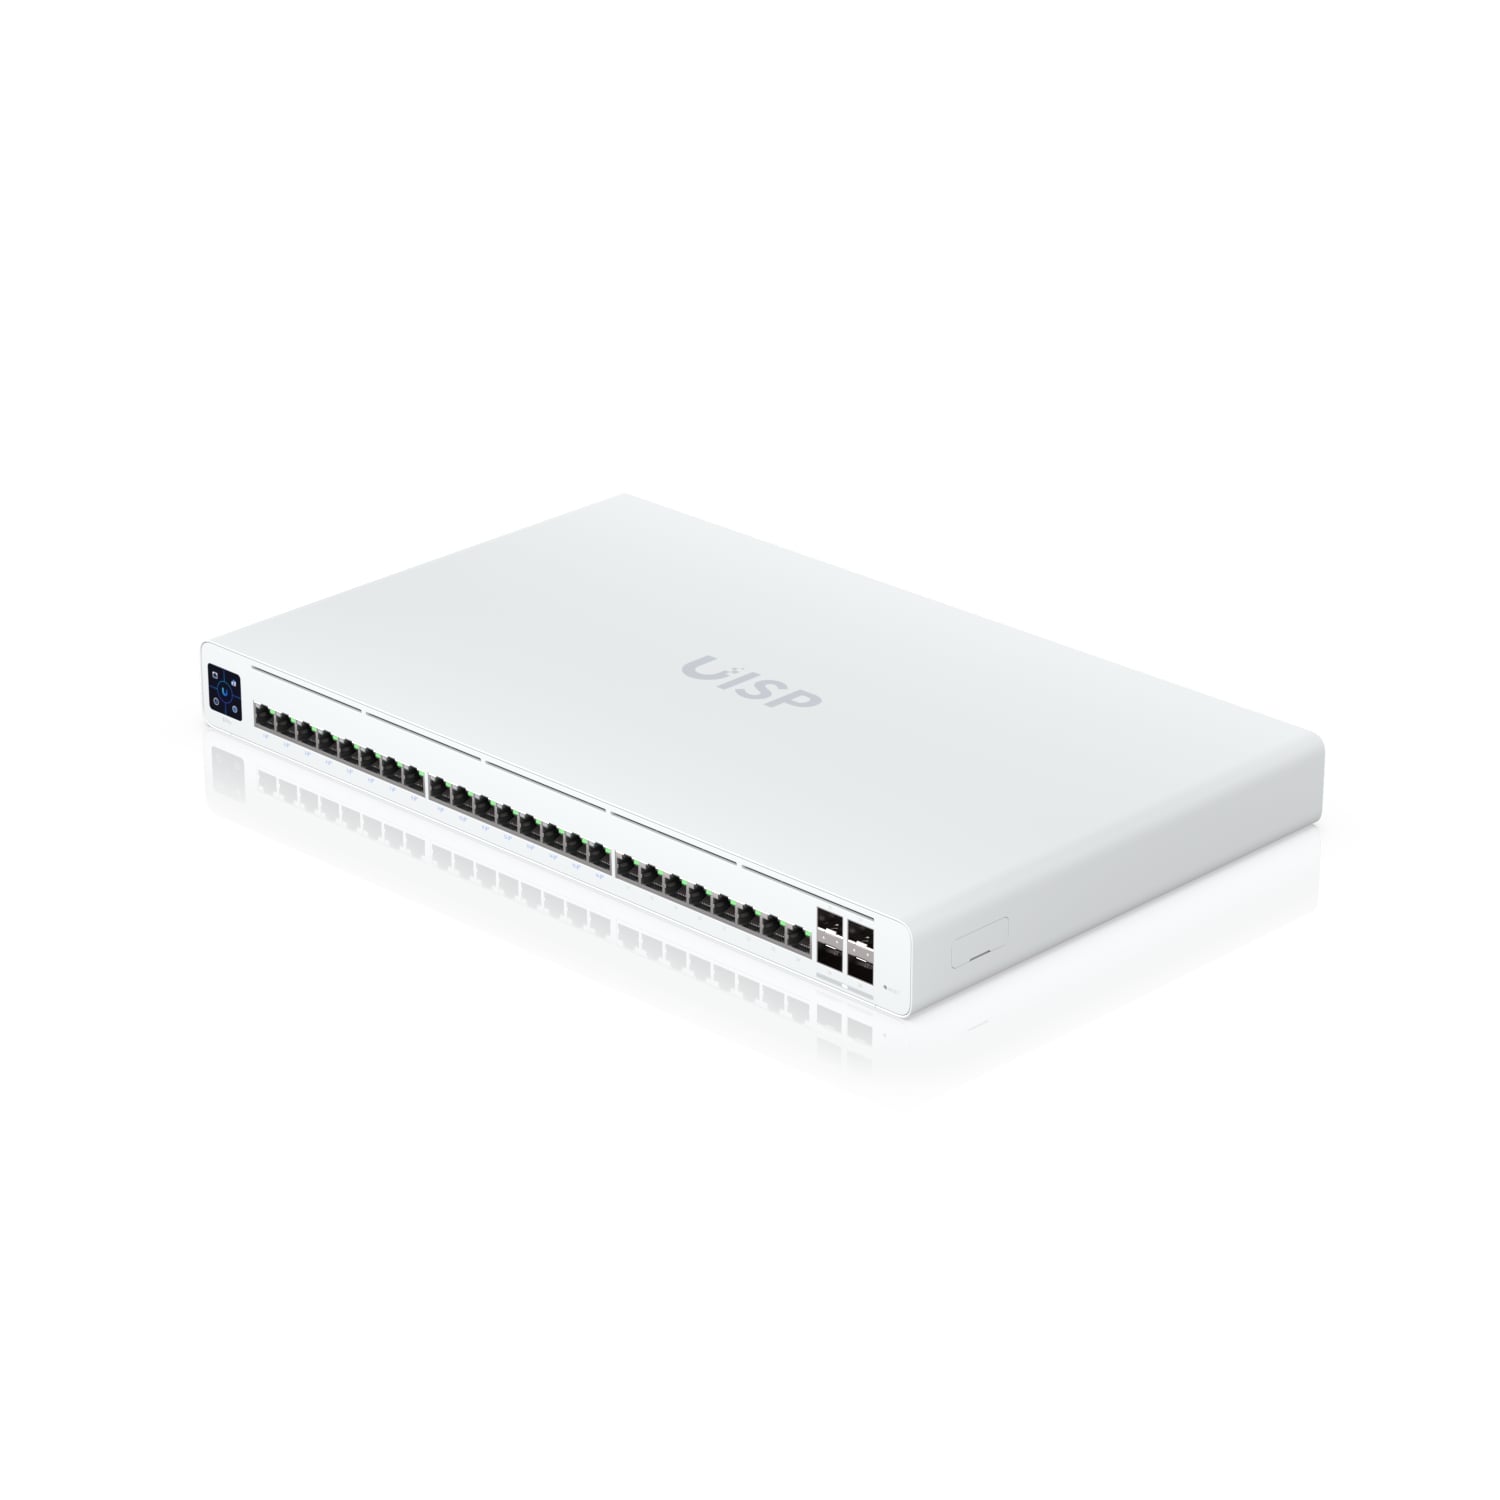 Ubiquiti UISP Switch Professional 24 GbE RJ45 ports 16 with 27V Passive PoE Output  4 10G SFP ports Color Touchscreen  Incl 2Yr Warr